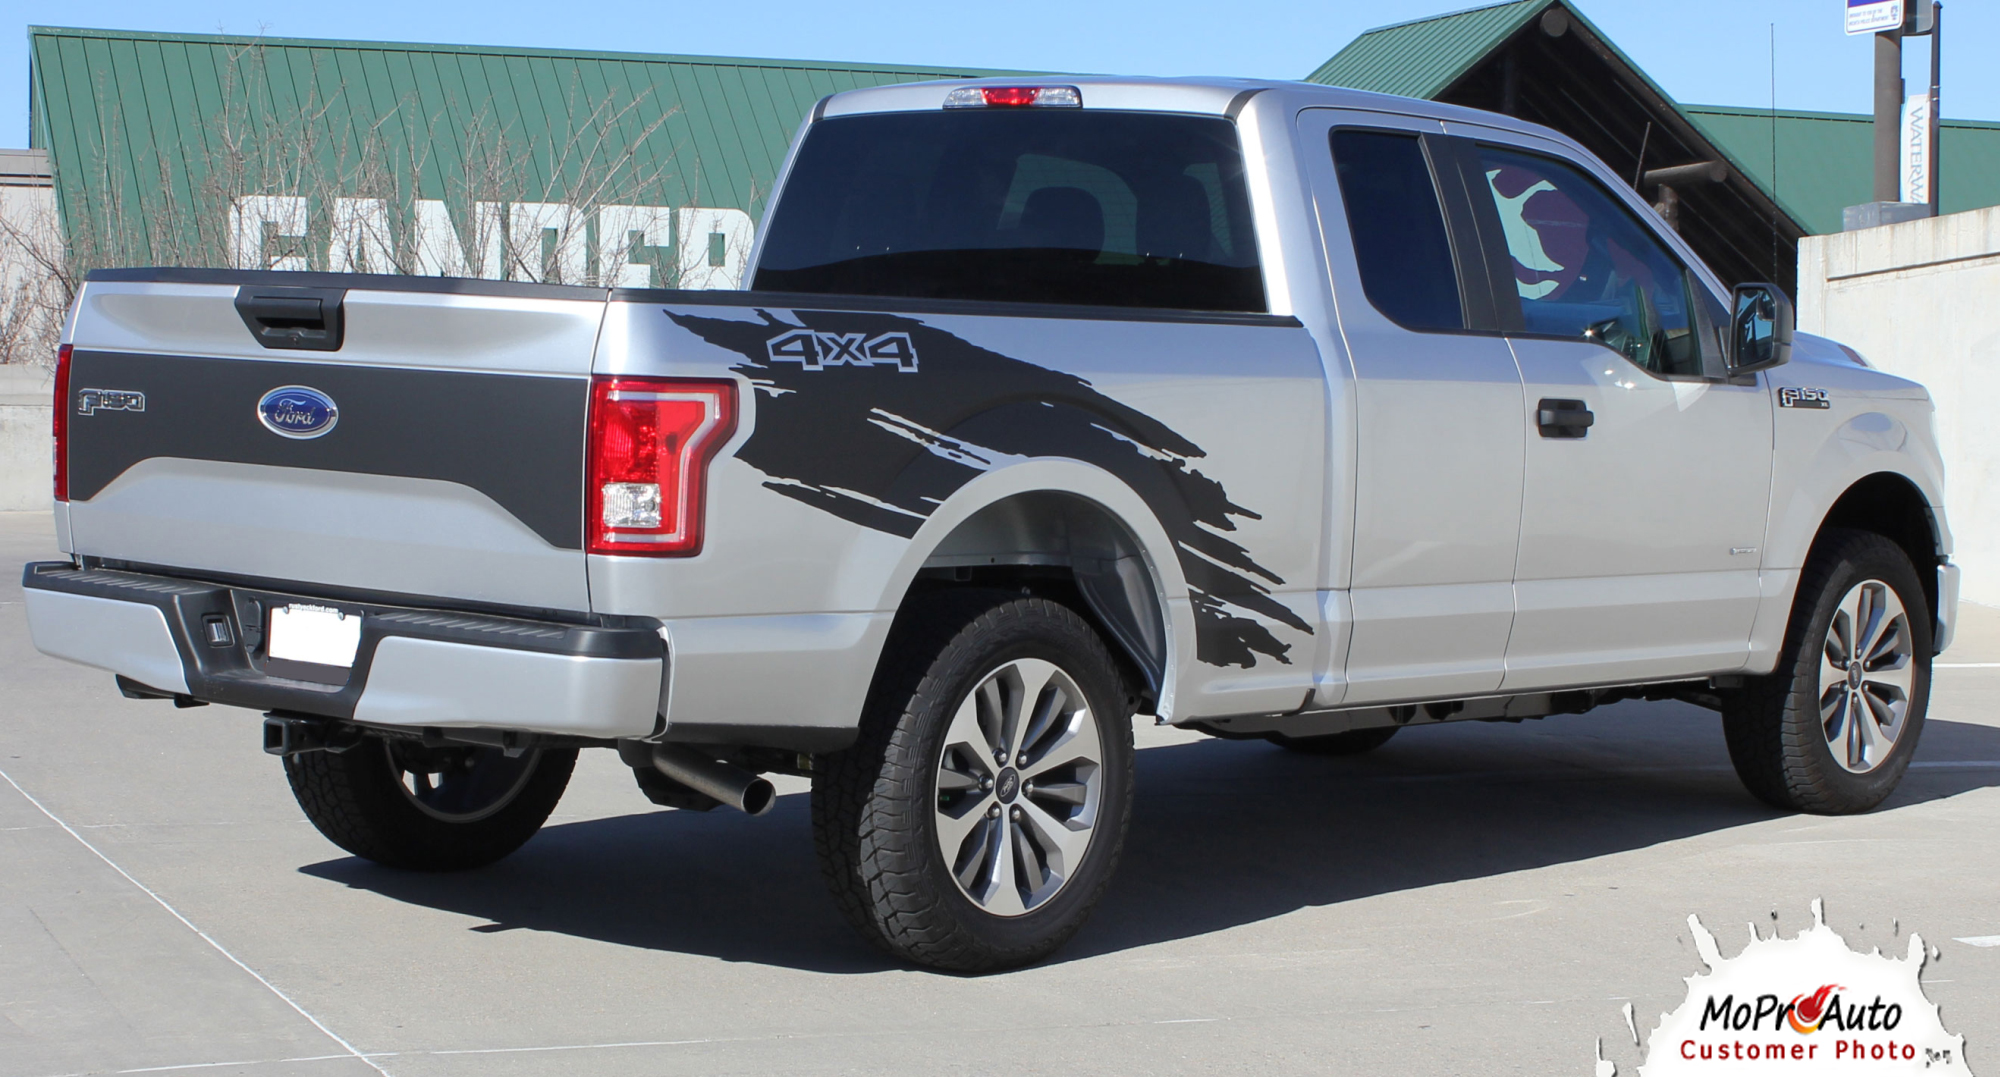 TORN MUDSLINGER Truck Bed Ford F-Series F-150 2015, 2016, 2017, 2018, 2019, 2020 Appearance Package Vinyl Graphics and Decals Kit - Customer Photo